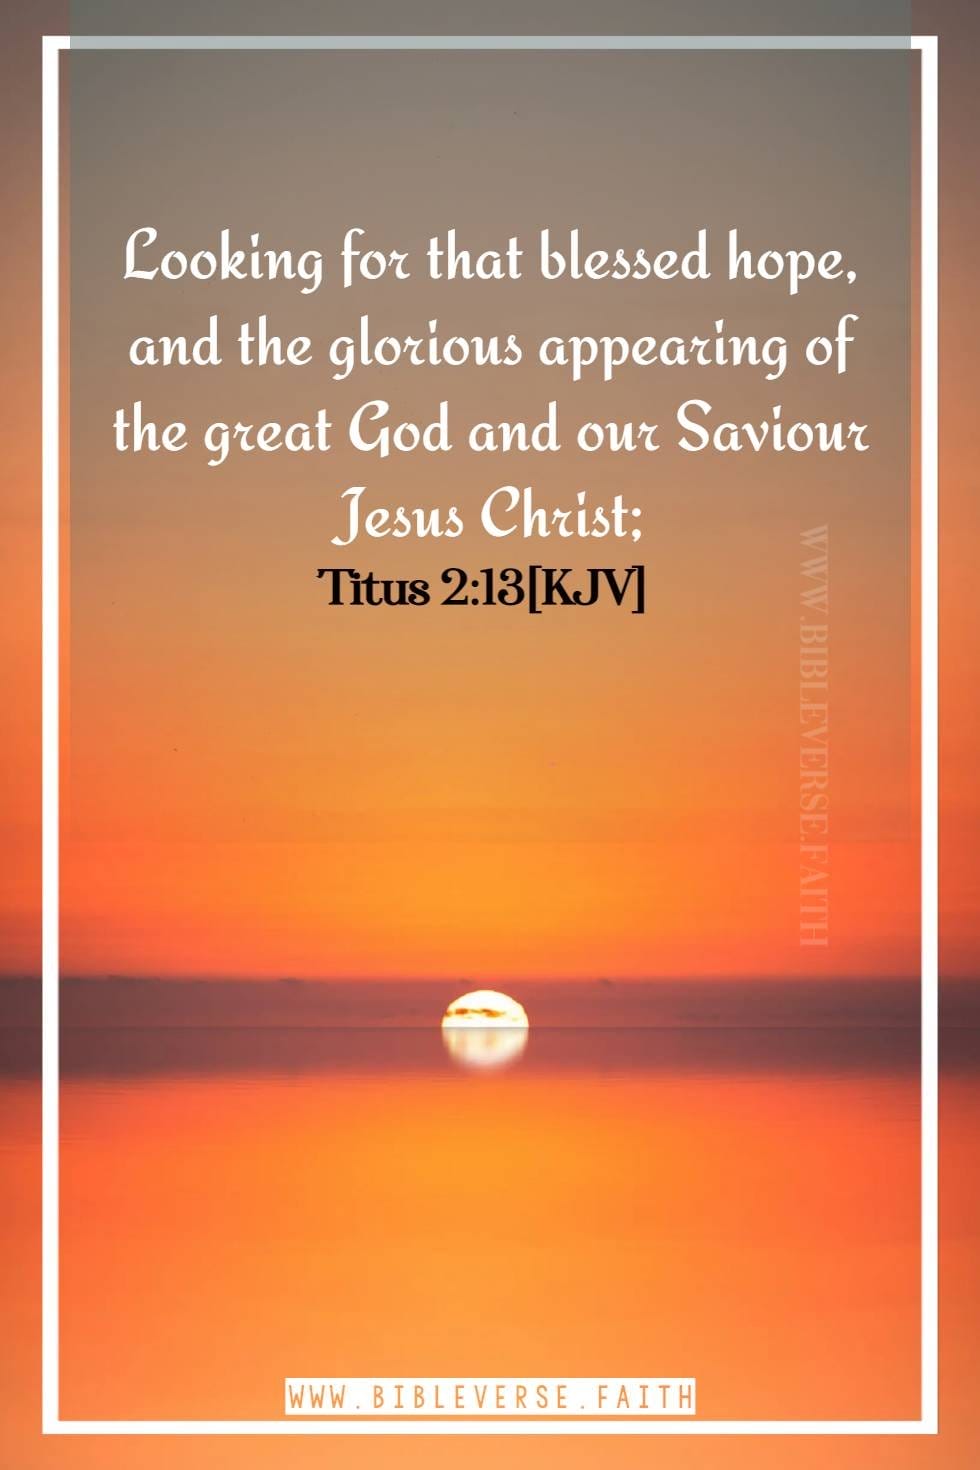 titus 2 13[kjv] bible verse about hope for the future